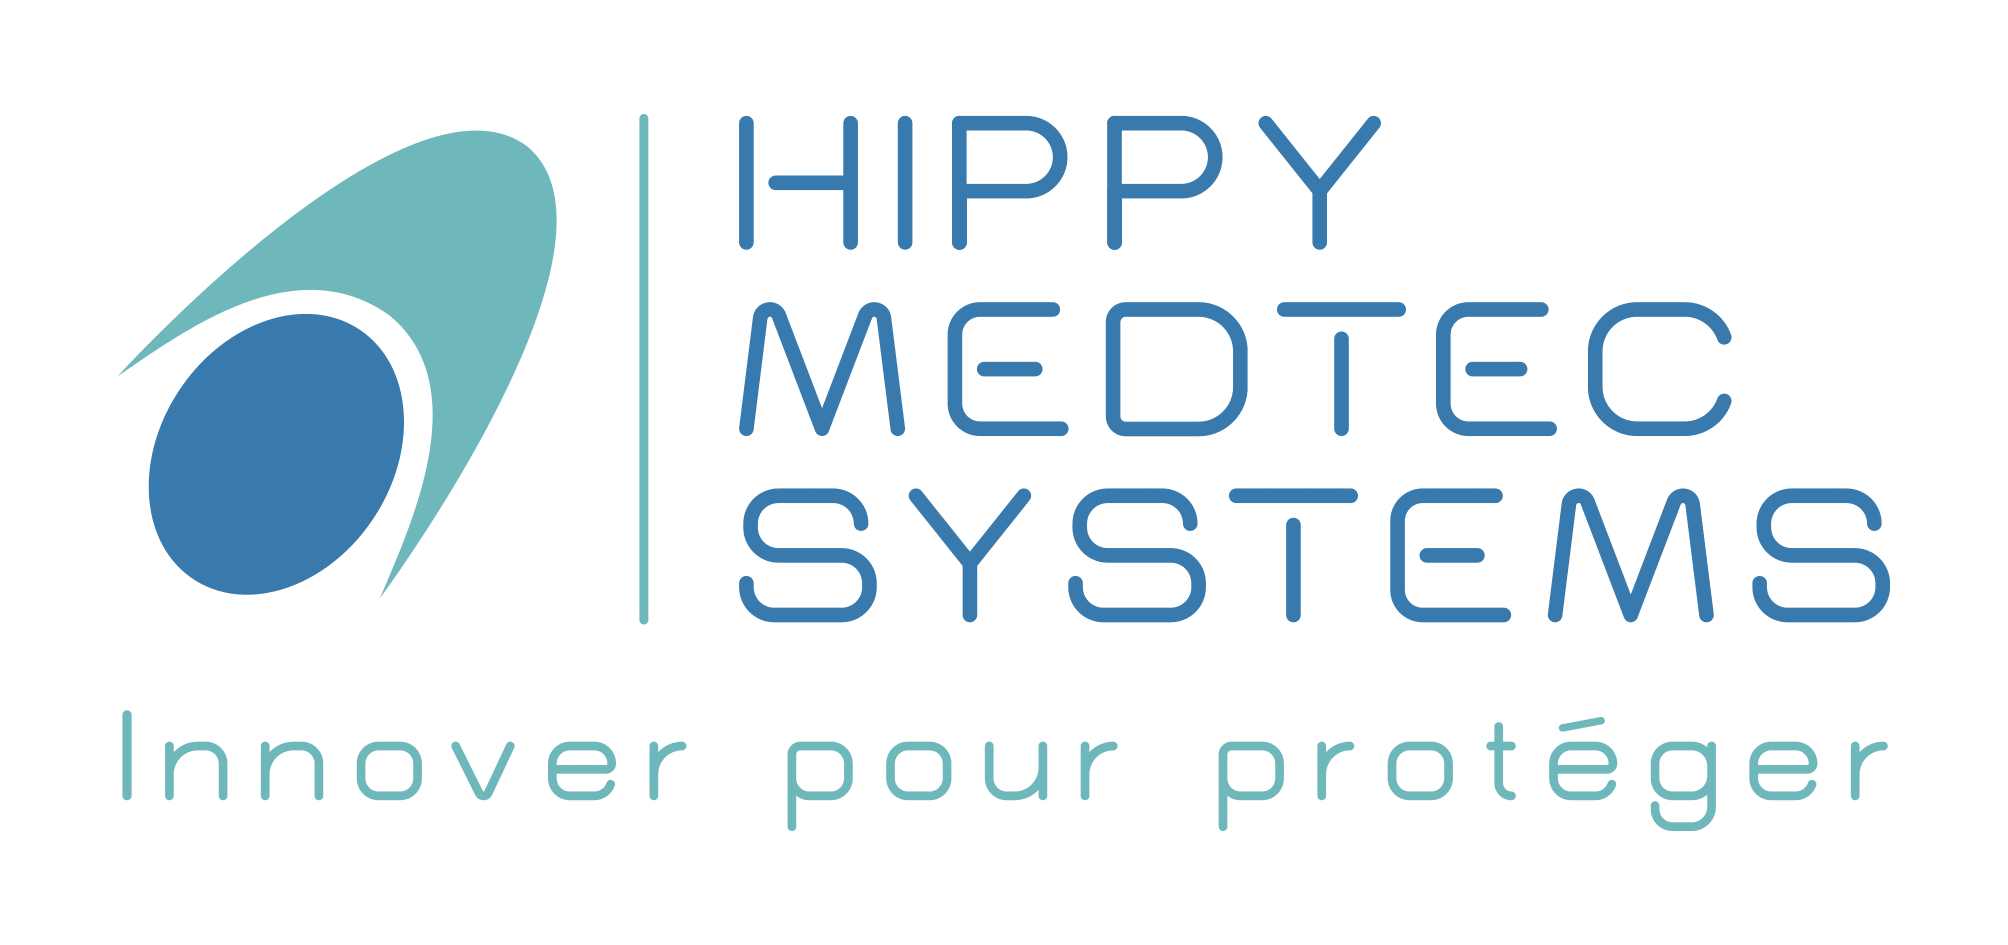 Image Hippy Medtec Systems